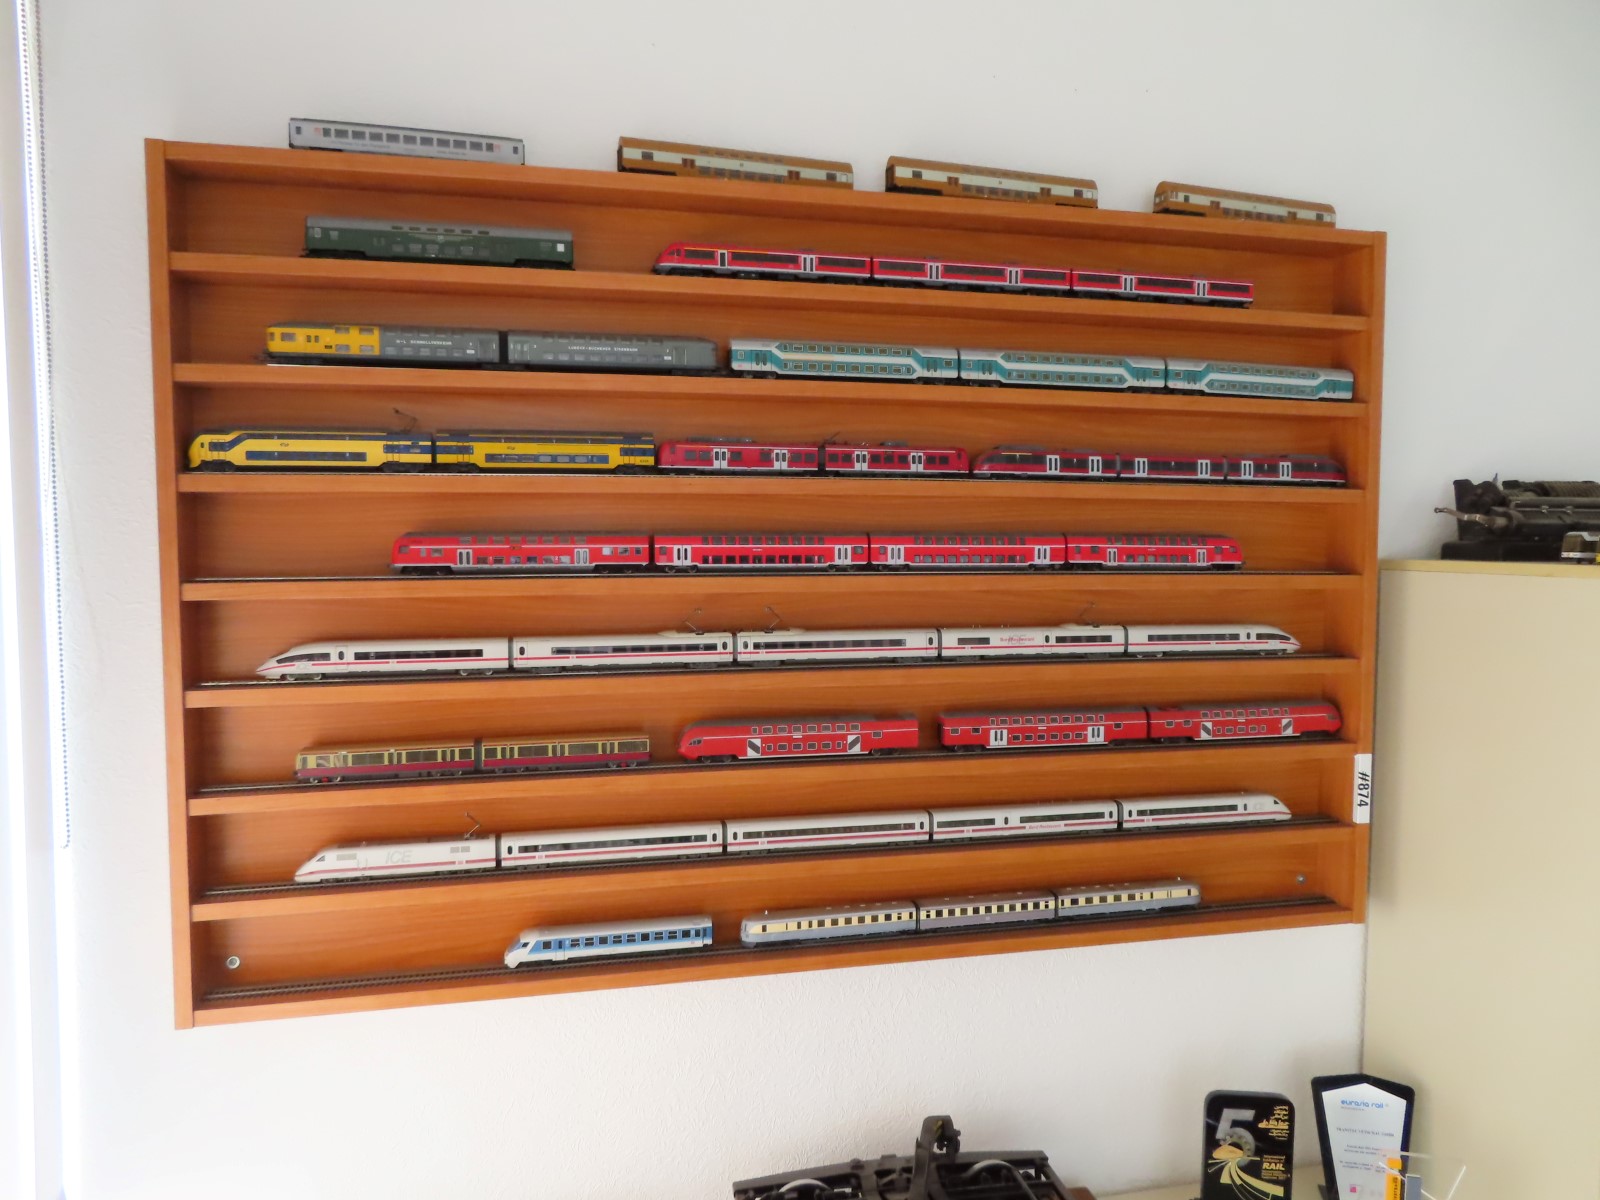 Lot of railway carriages